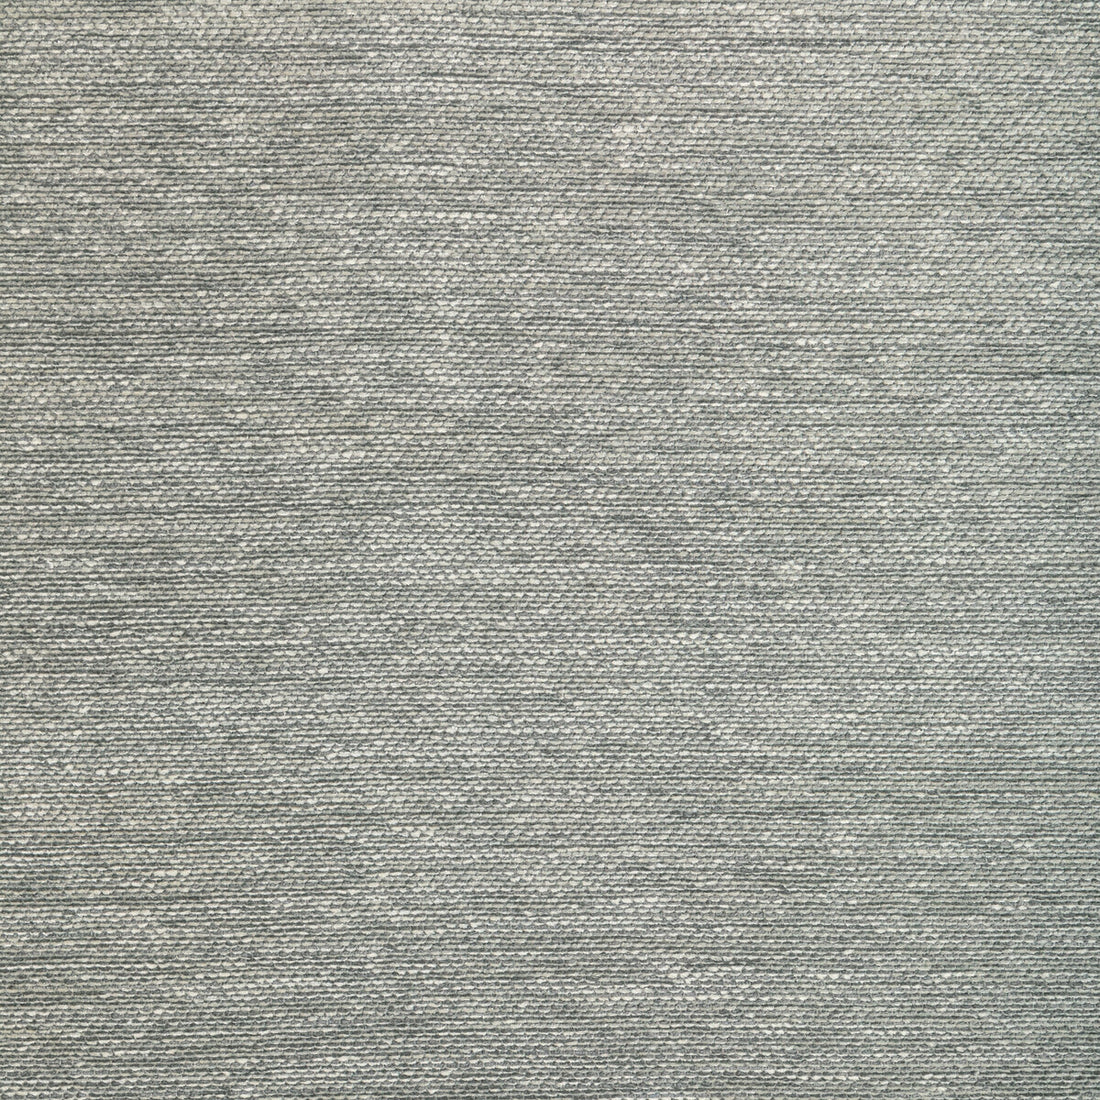 Cognin Texture fabric in stone color - pattern 8022126.11.0 - by Brunschwig &amp; Fils in the Chambery Textures III collection